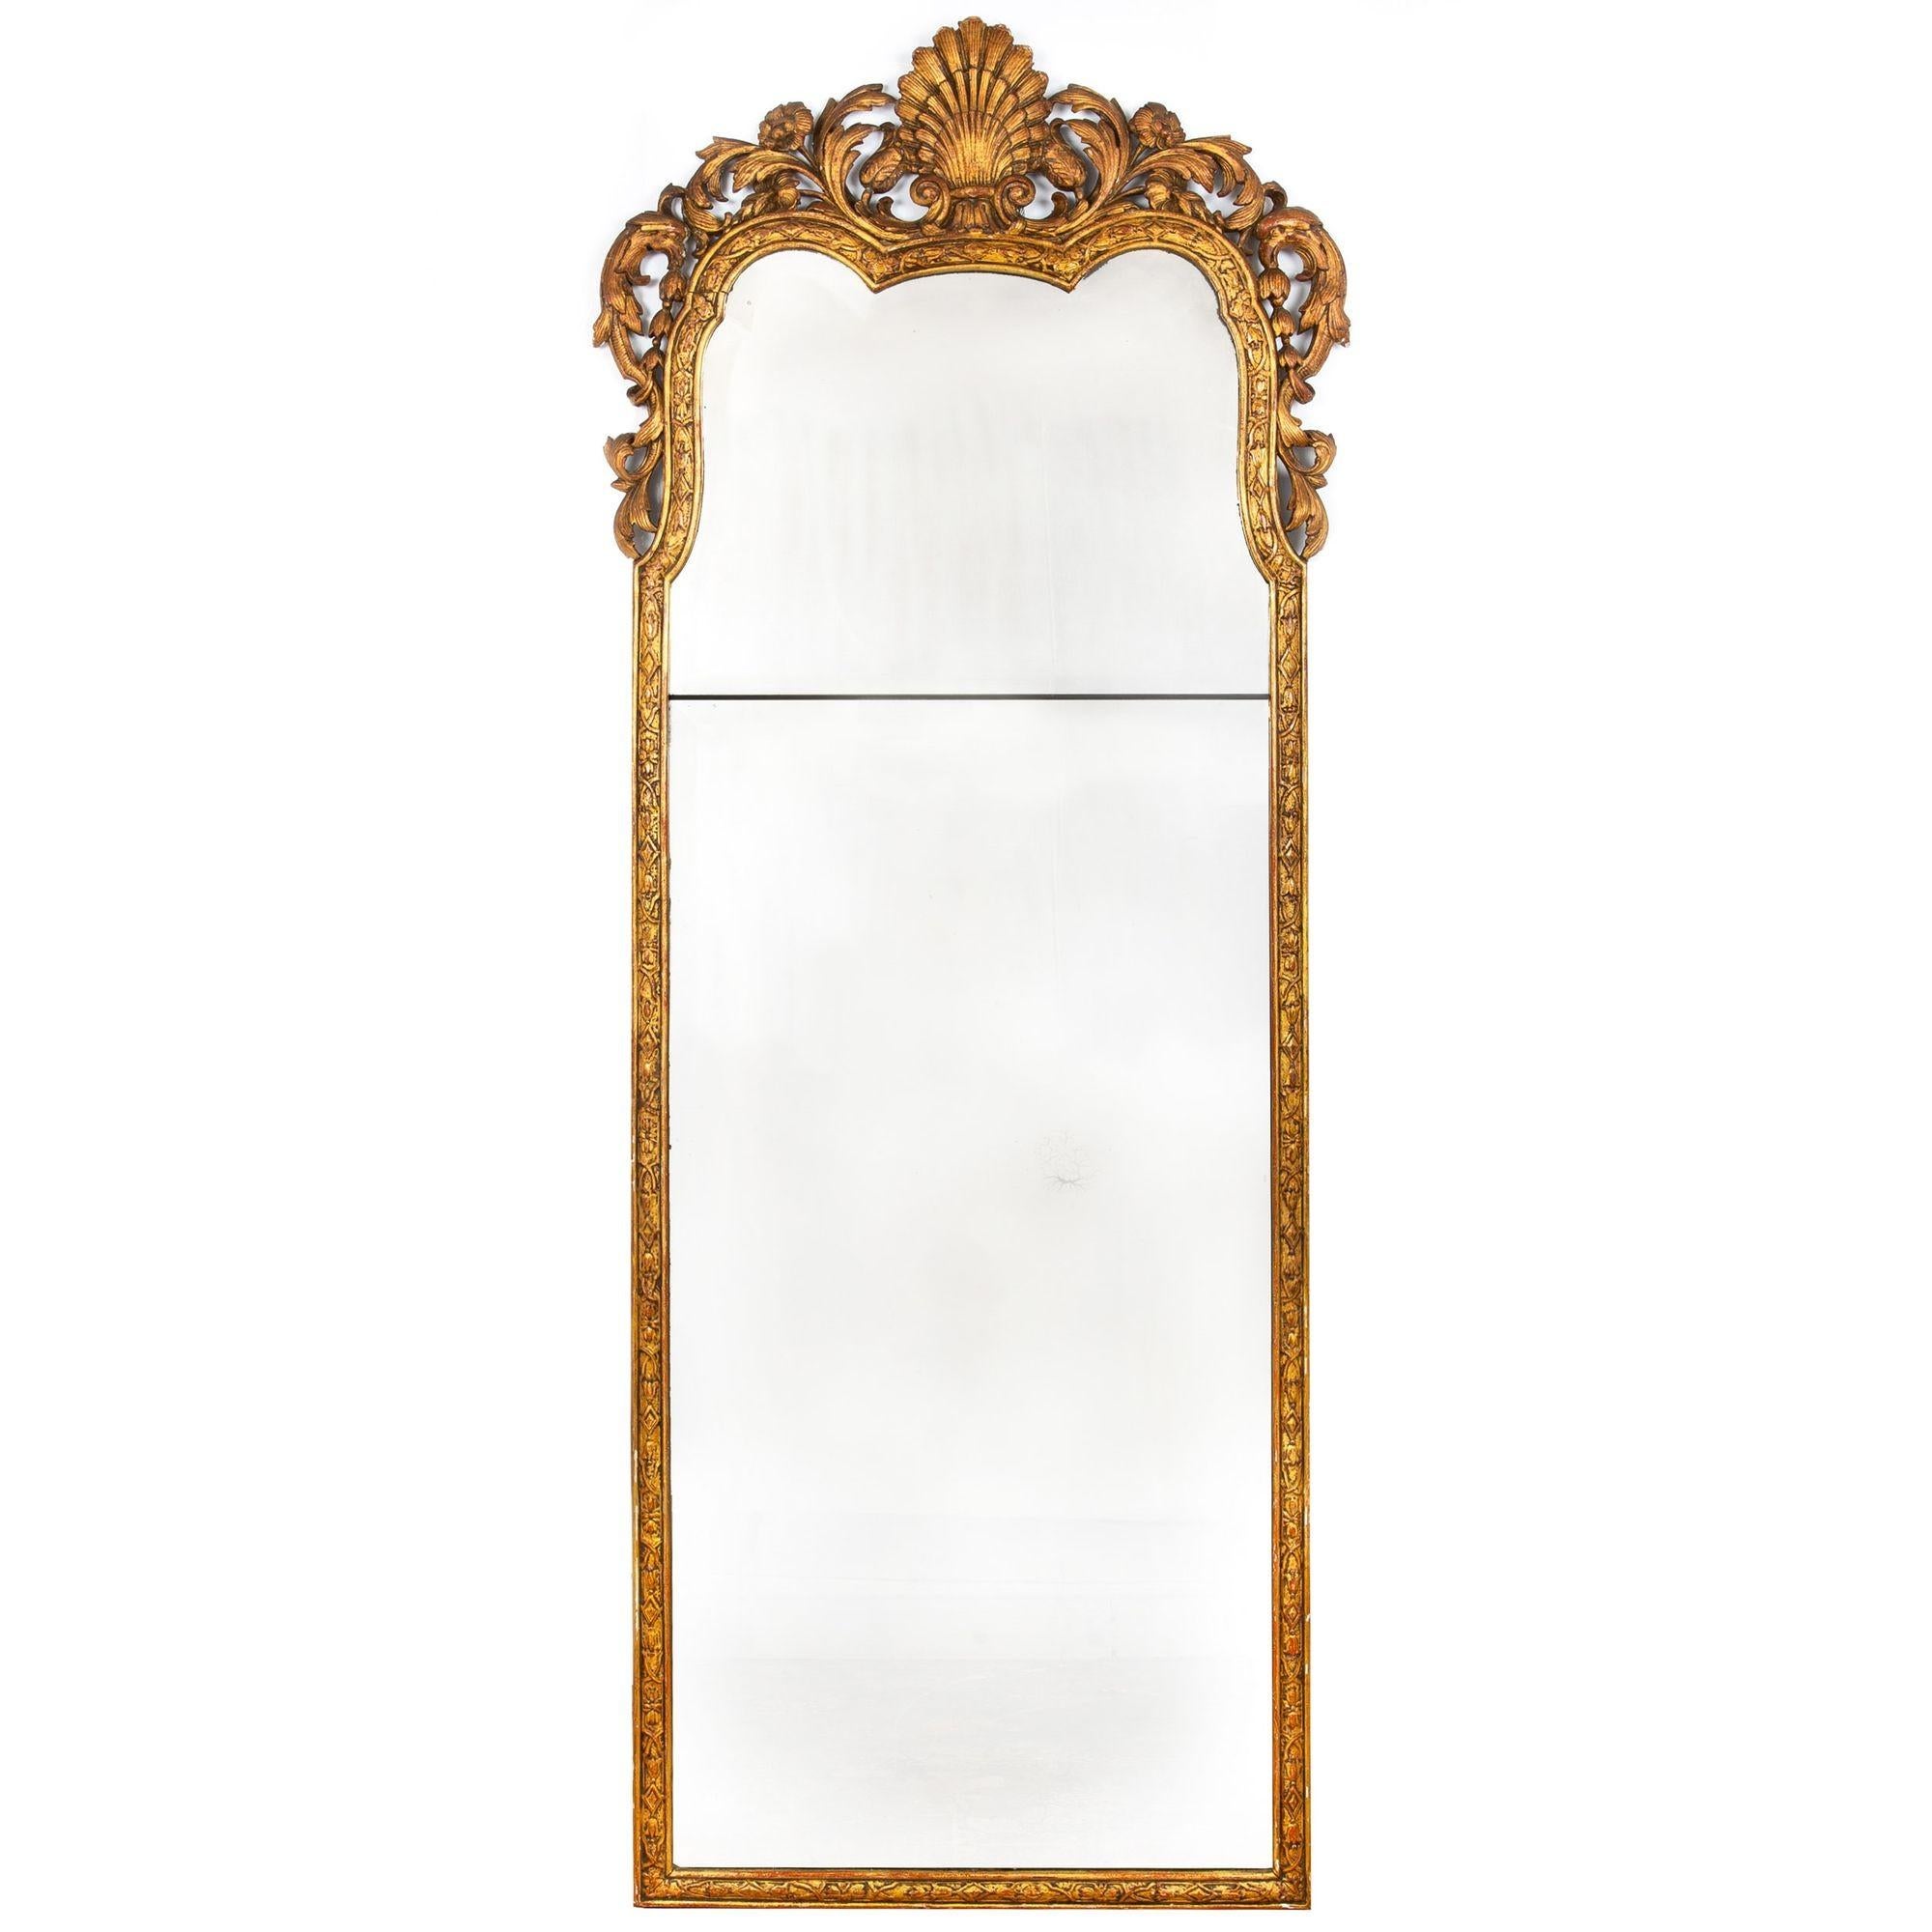 An exceedingly fine pair of giltwood mirrors, they are perfectly matched and feature a rich surface patina from centuries of life and gentle handling. Much of the original gilding is retained in the frames, this rubbed away to reveal rich tones of